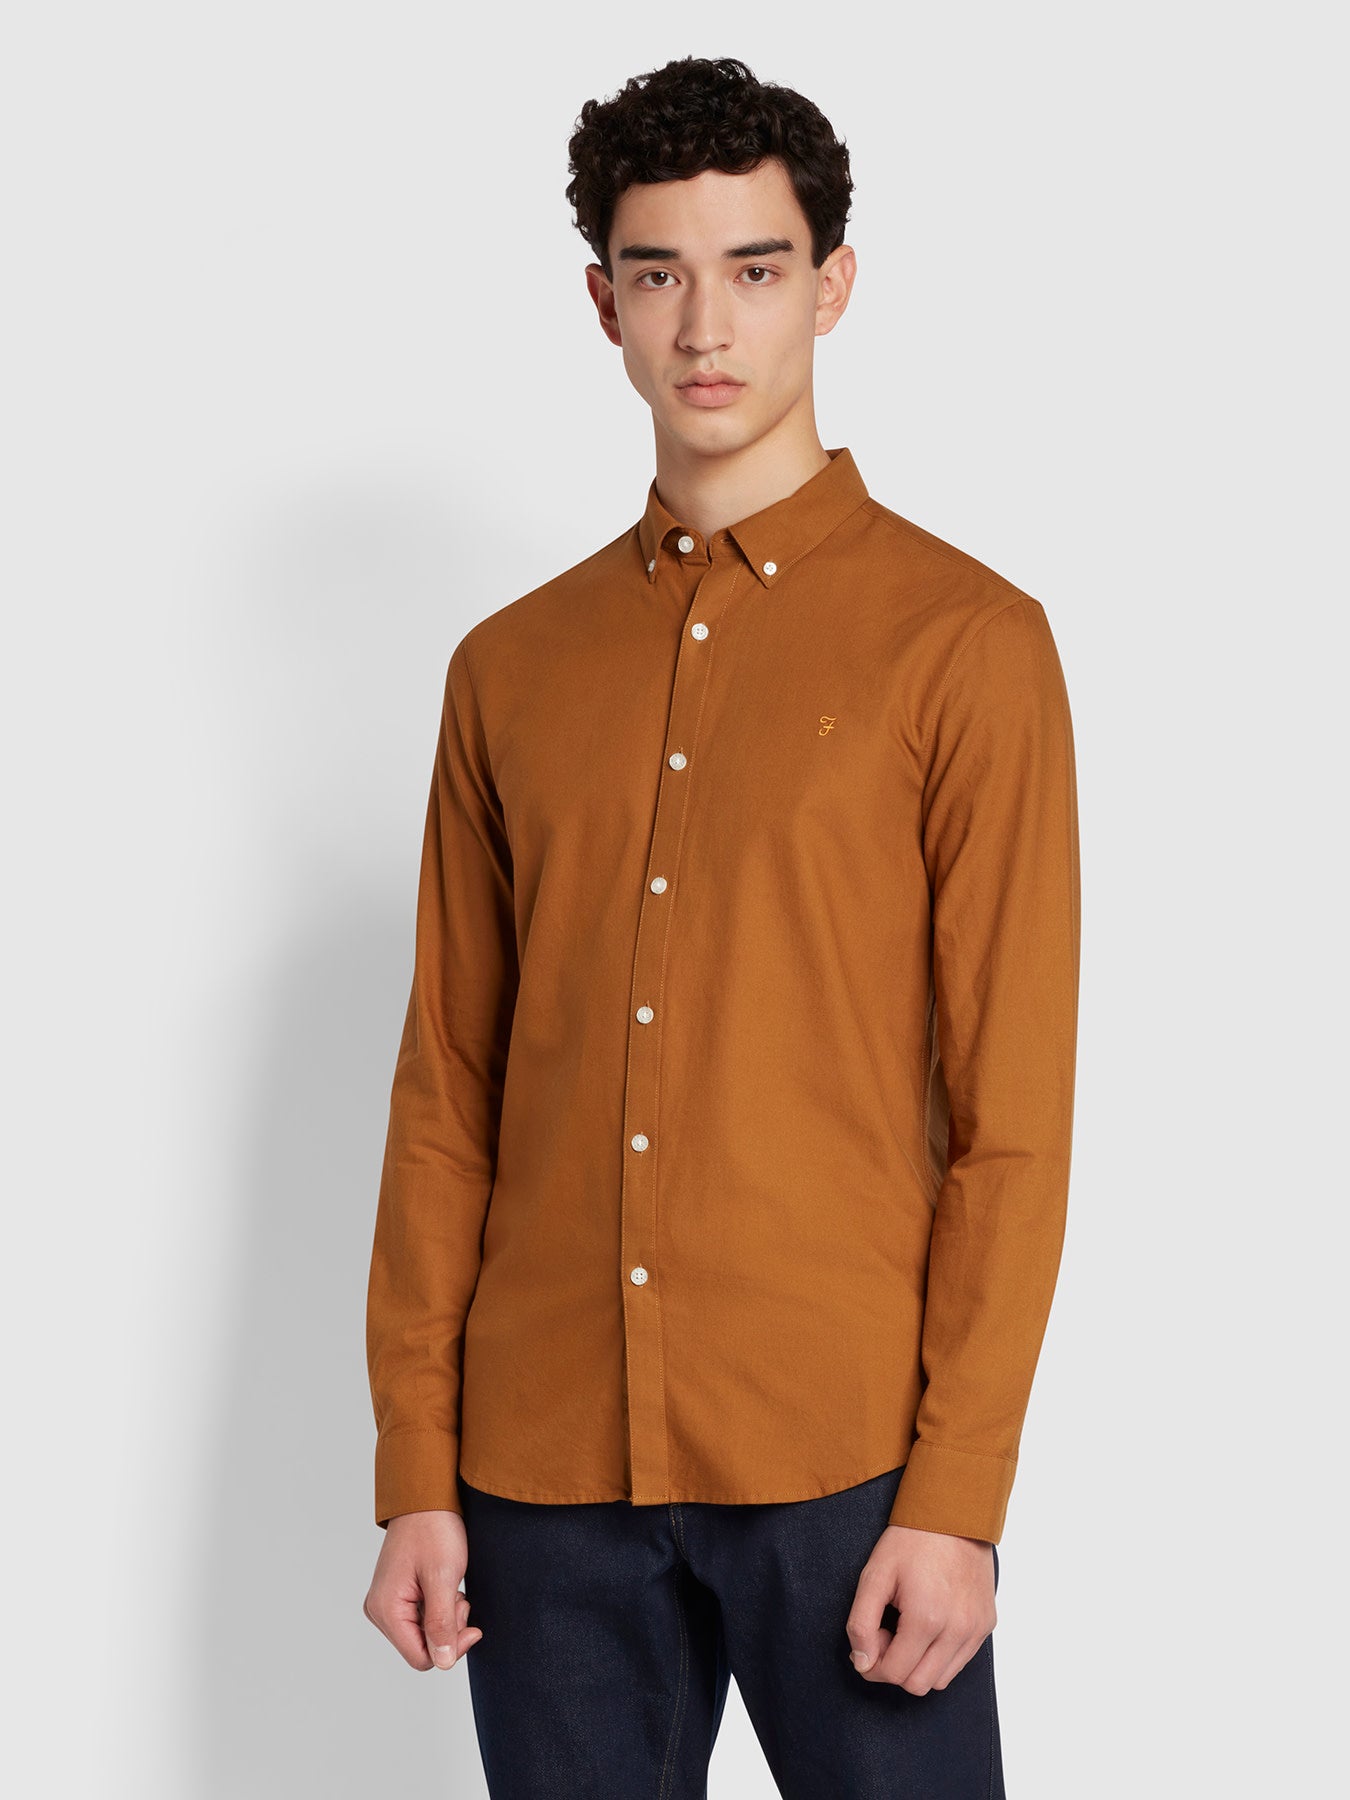 View Brewer Slim Fit Organic Cotton Long Sleeve Shirt In Rich Tobacco information